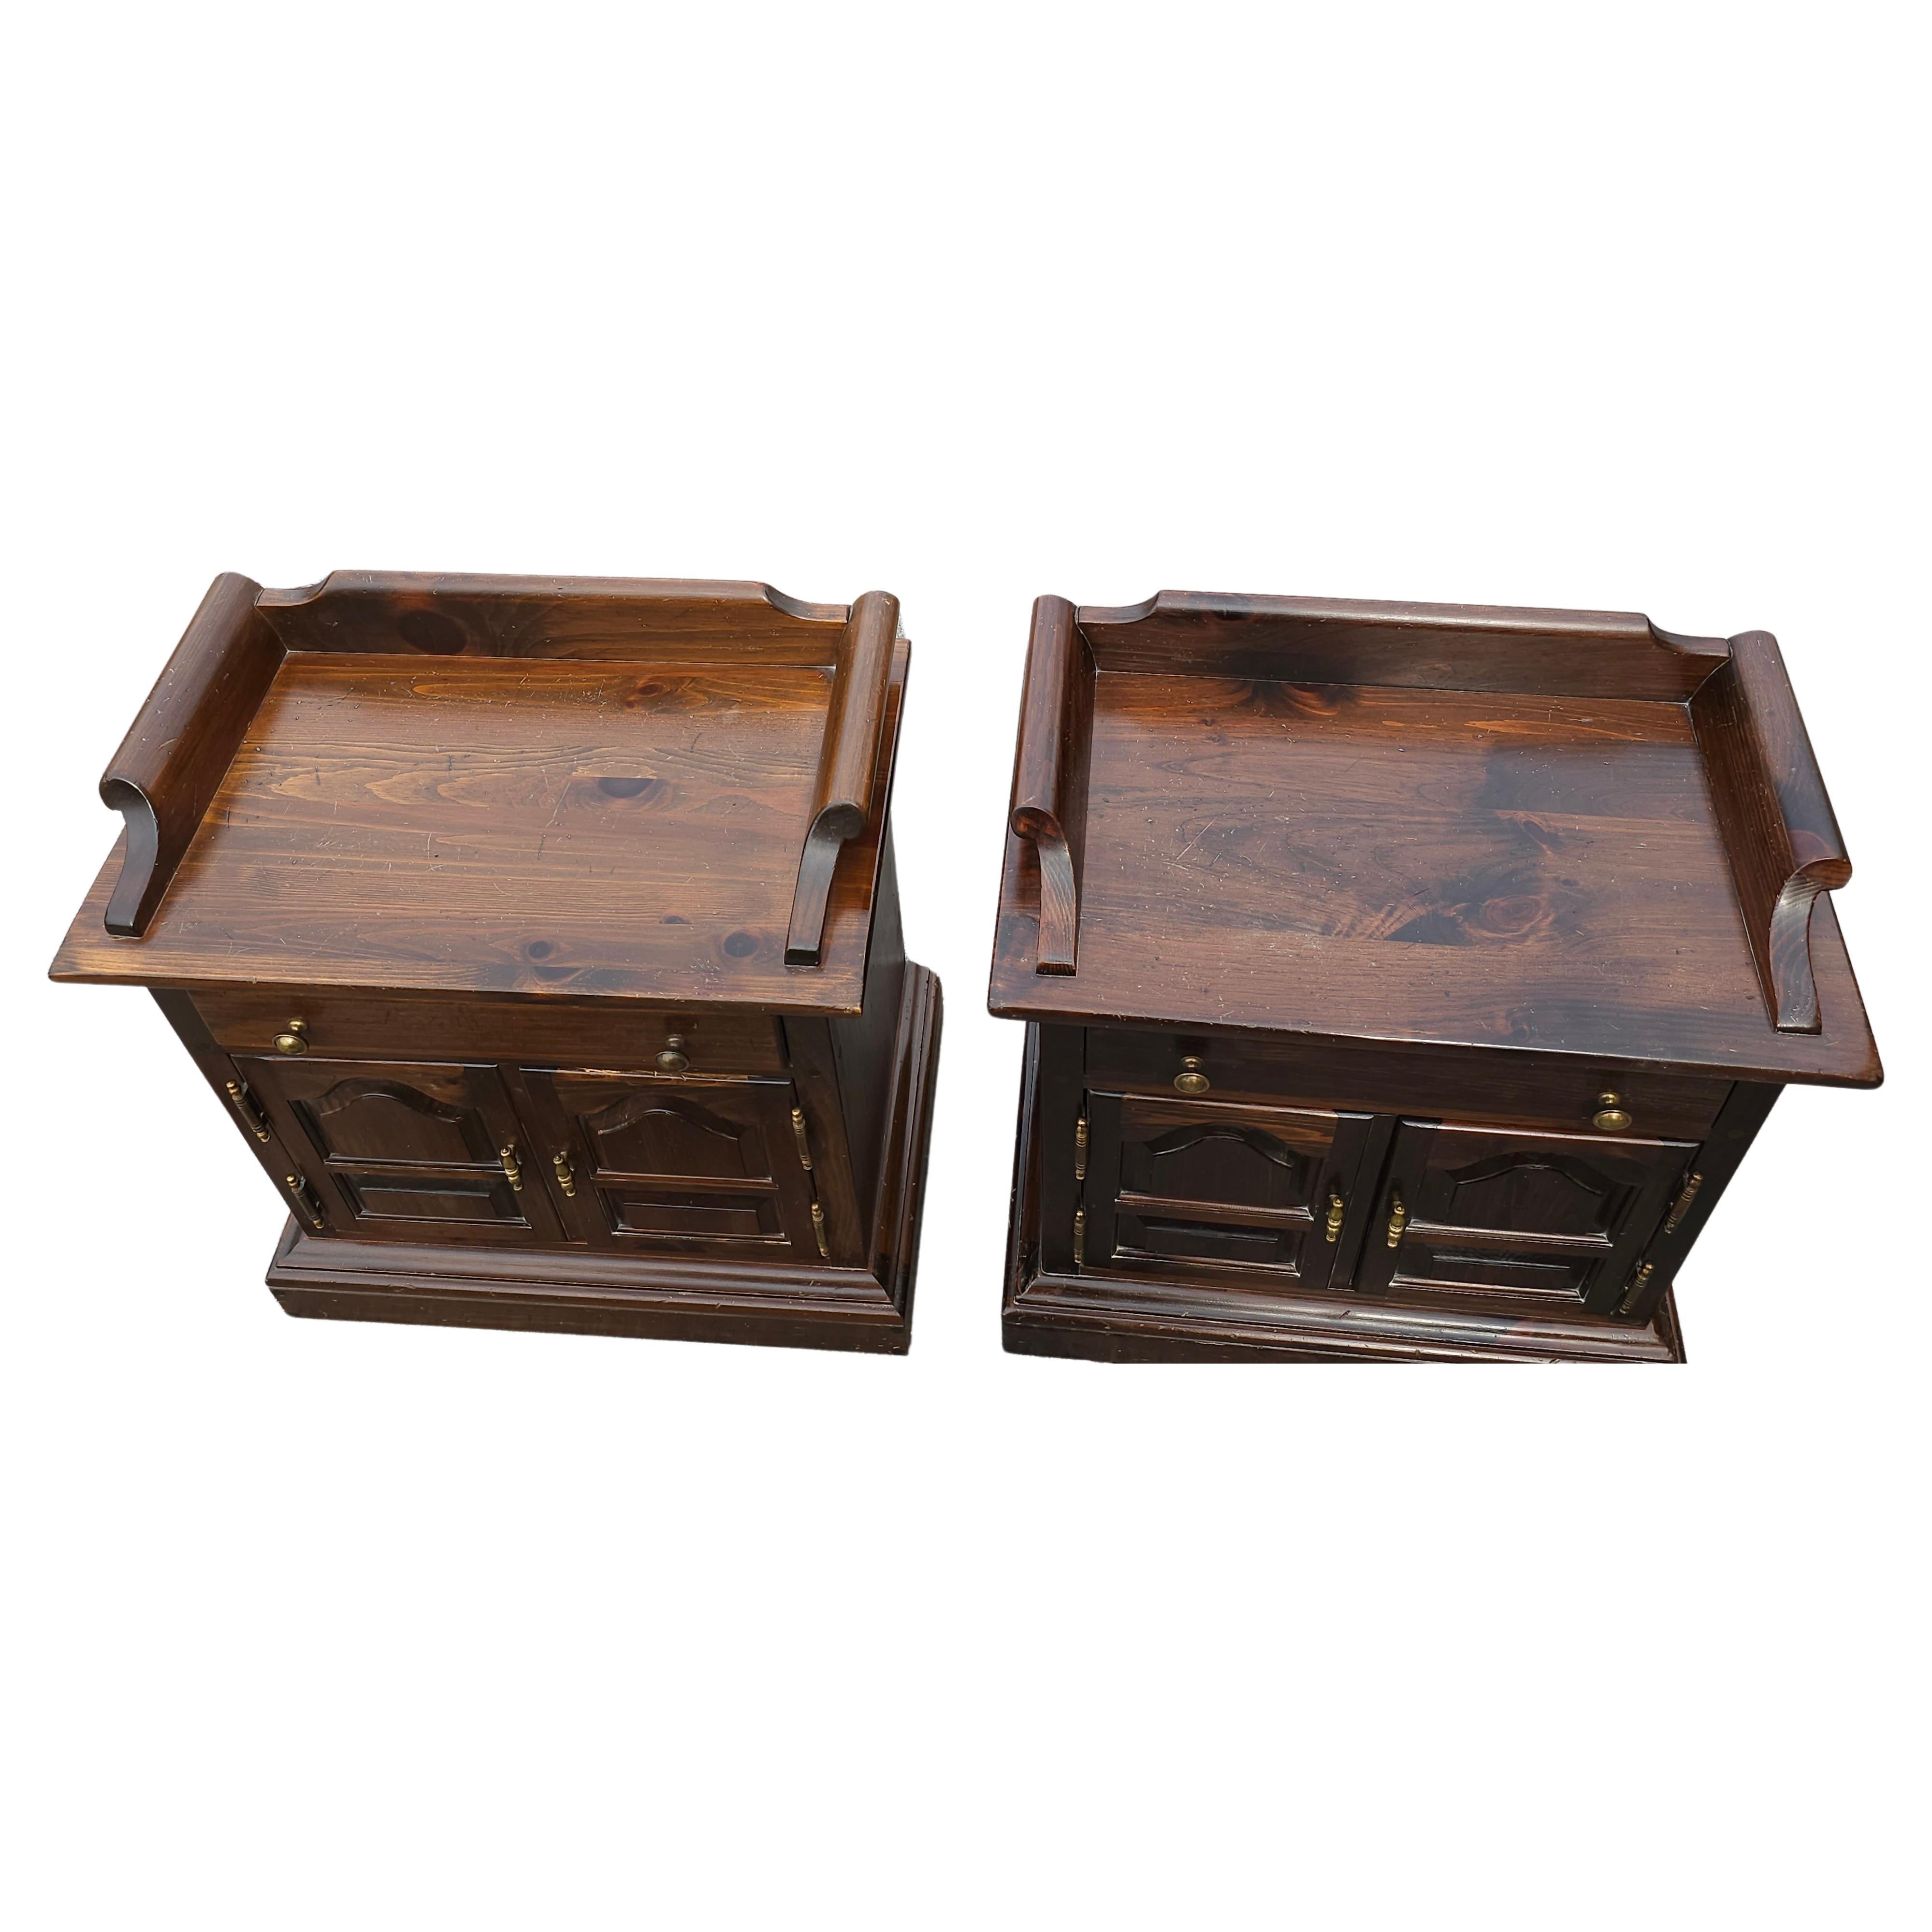 Pair of Mid Century Antiqued and Distressed Solid Pine Bedside Cabinets Nightstands. Ample storage
Measures 26